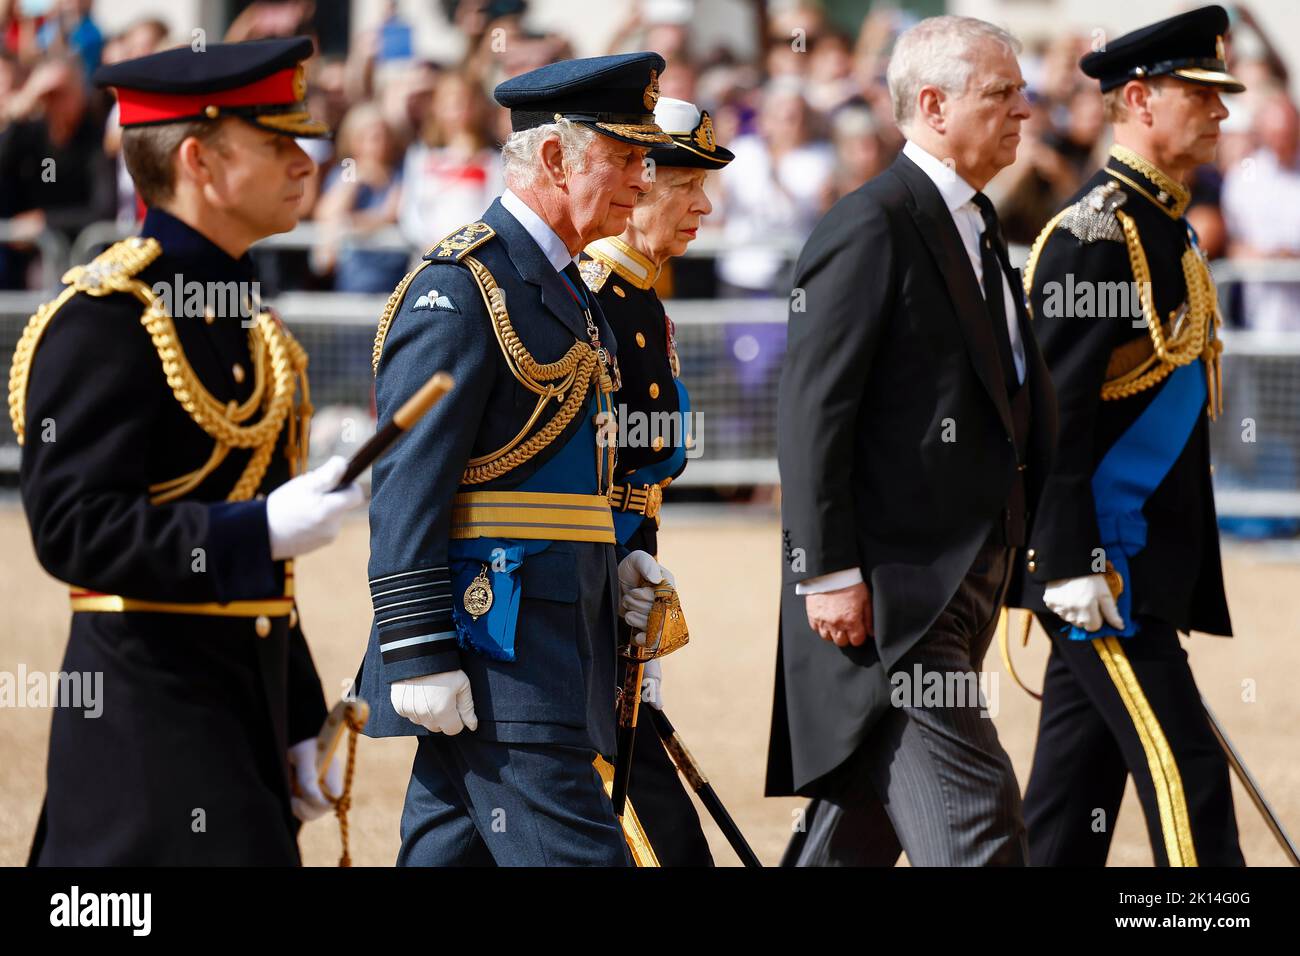 King Charles III and members of the royal family follow the coffin of Queen Elizabeth II, draped in the Royal Standard, as it is carried on a horse-drawn gun carriage of the King's Troop Royal Horse Artillery, during the ceremonial procession from Buckingham Palace to Westminster Hall, London, where it will lie in state ahead of her funeral on Monday. Picture date: Wednesday September 14, 2022. Stock Photo